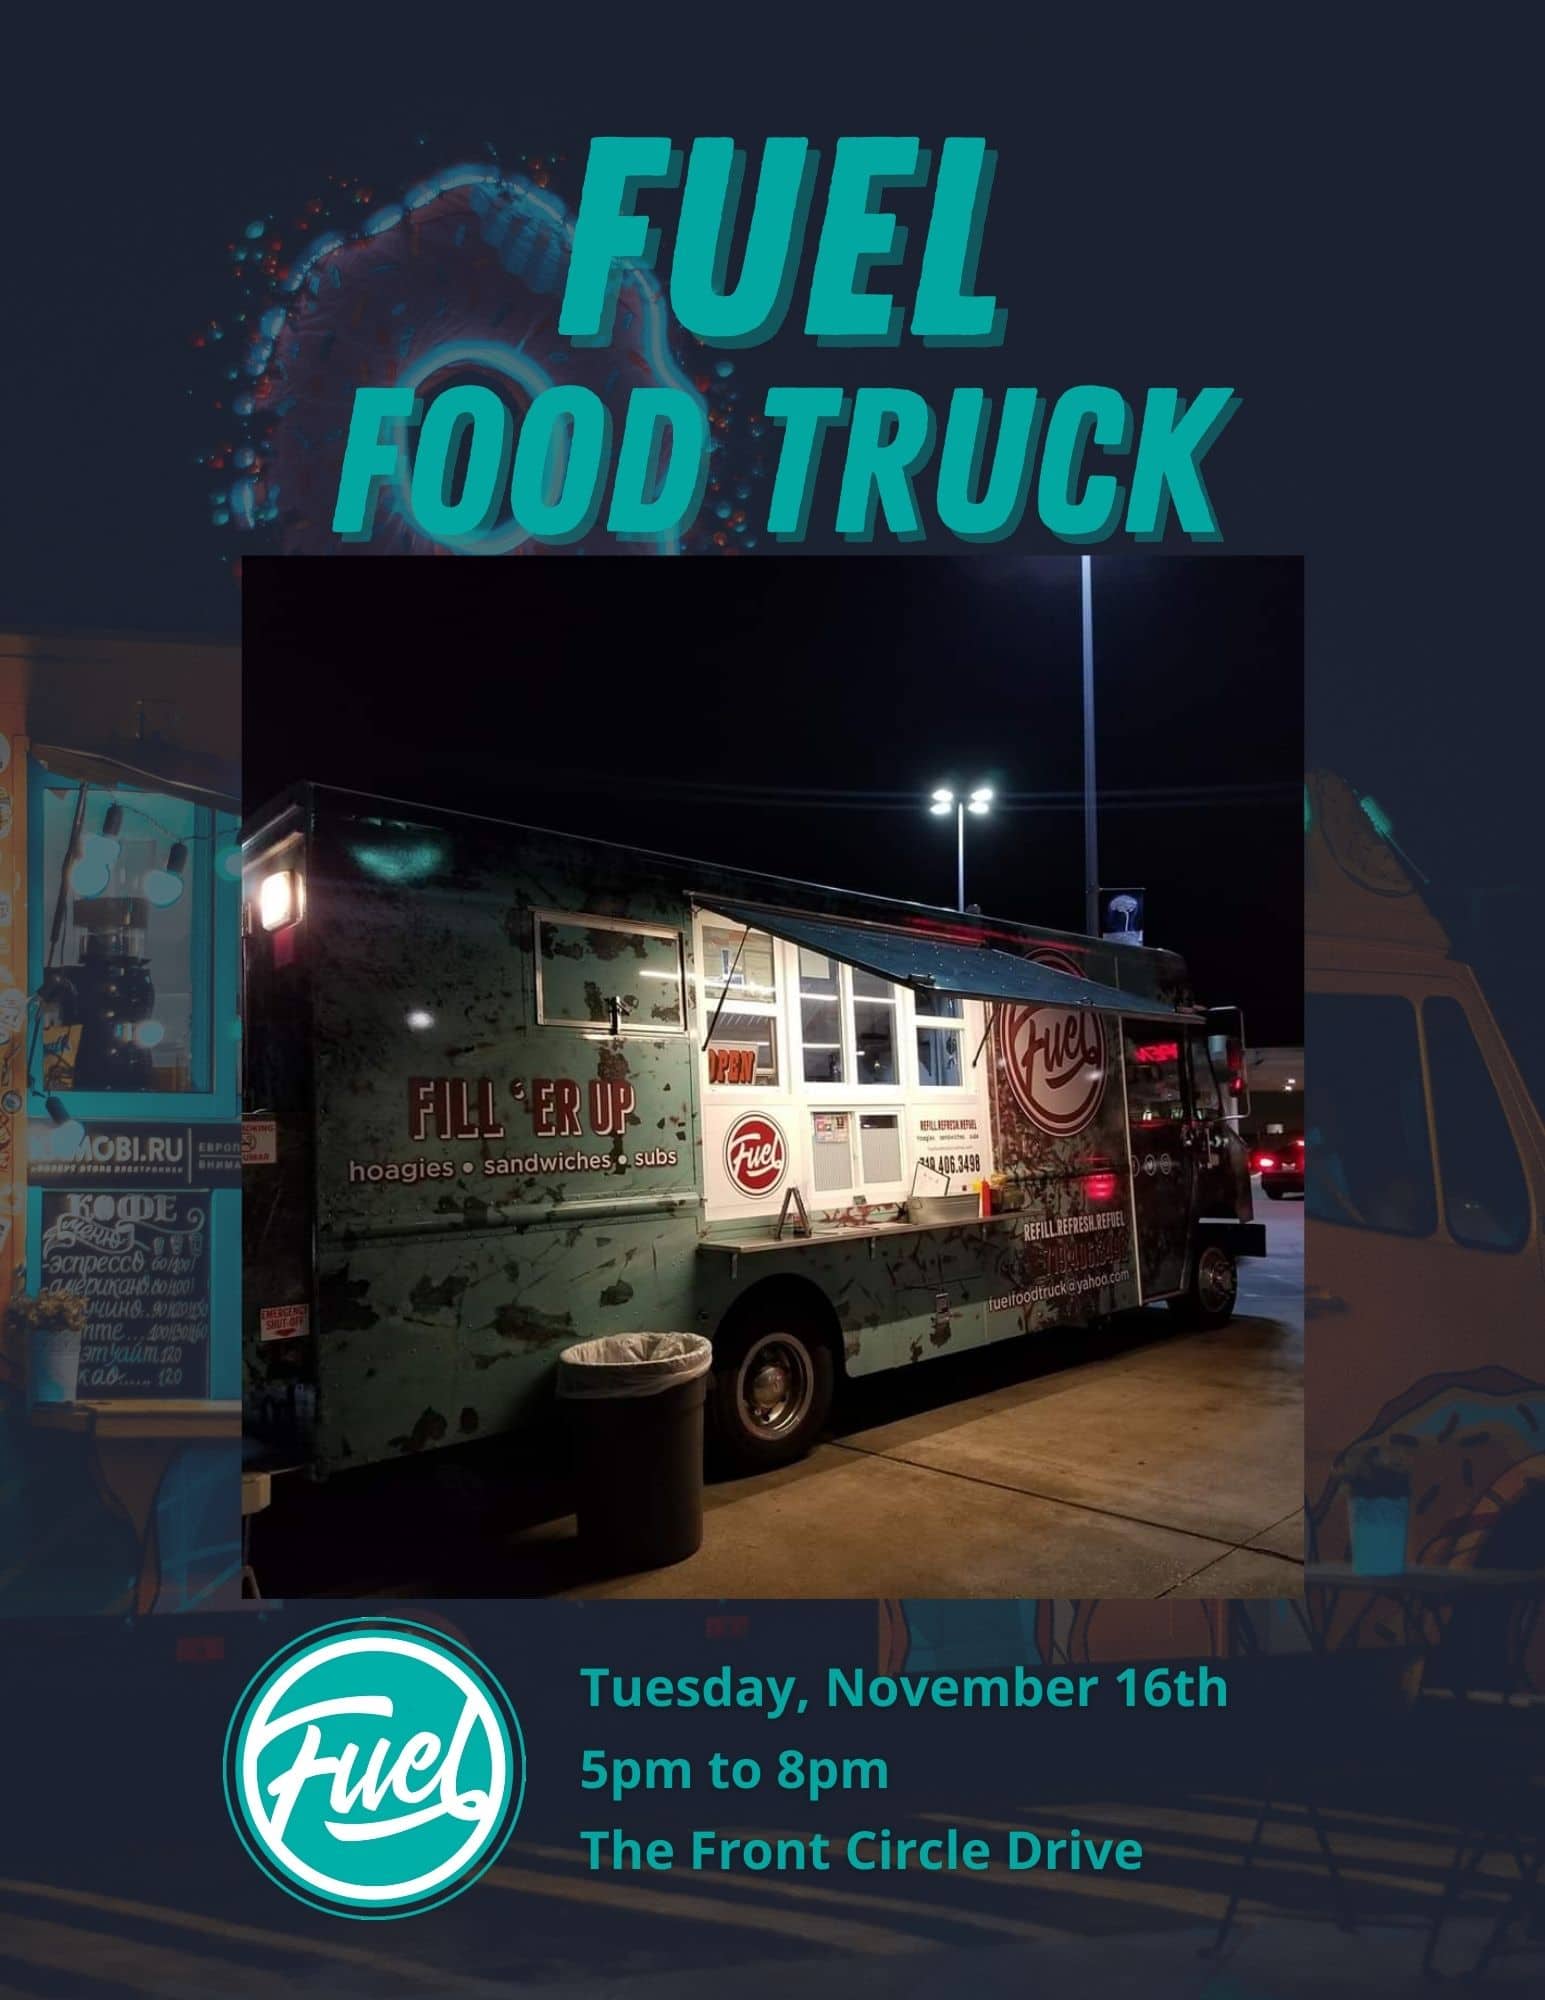 A poster showcasing the fuel food truck, conveniently located near apartments in The Woodlands, TX.